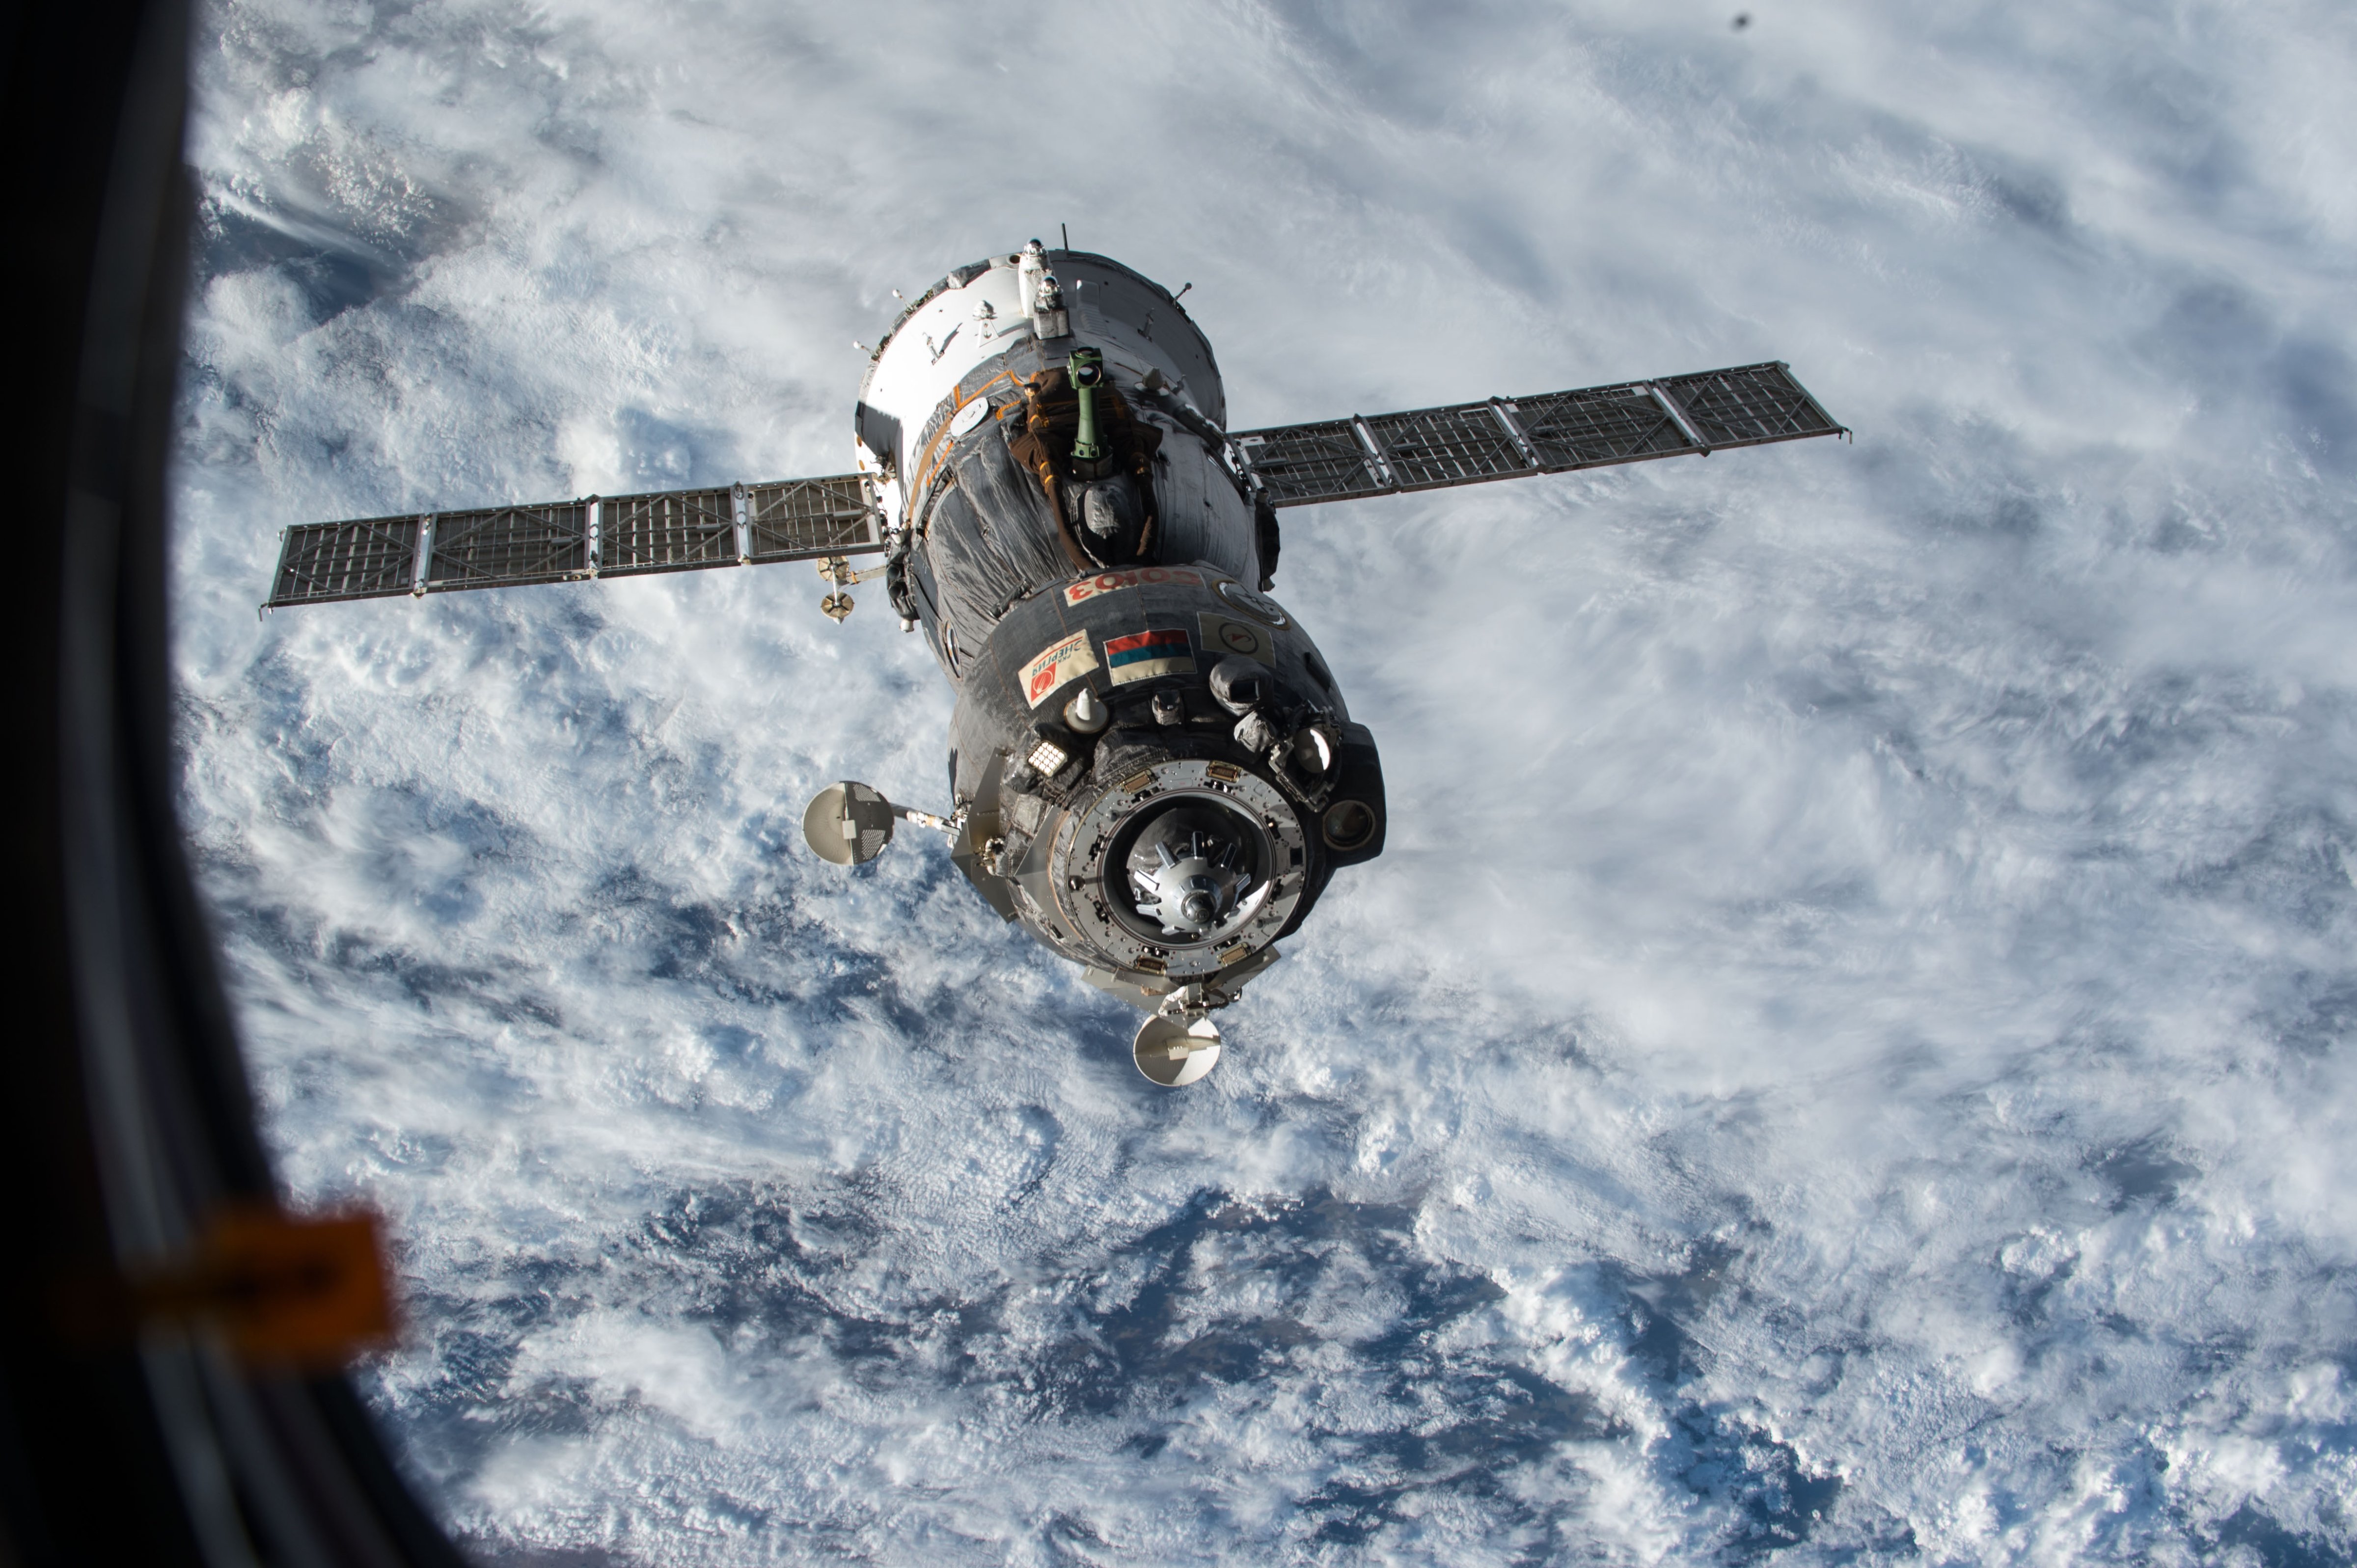 Need a lift? A Souyz spacecraft after undocking from the space station on June 11, 2015 (NASA)